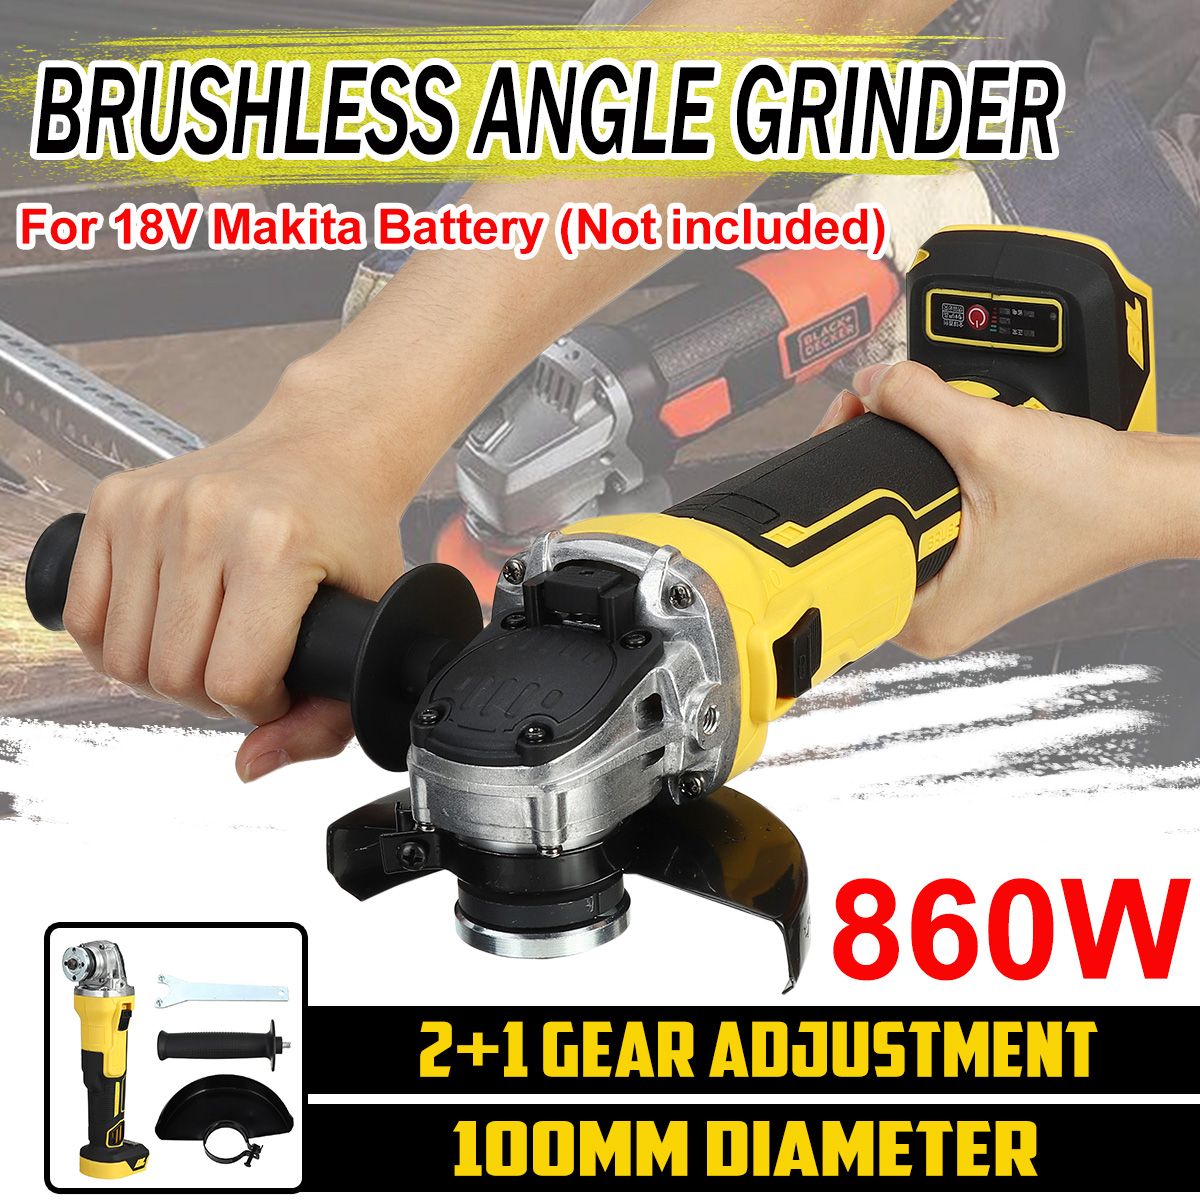 100mm-Brushless-Rechargeable-Angle-Grinder-Electric-Polishing-Cutting-Machine-For-Makita-18V-Battery-1751311